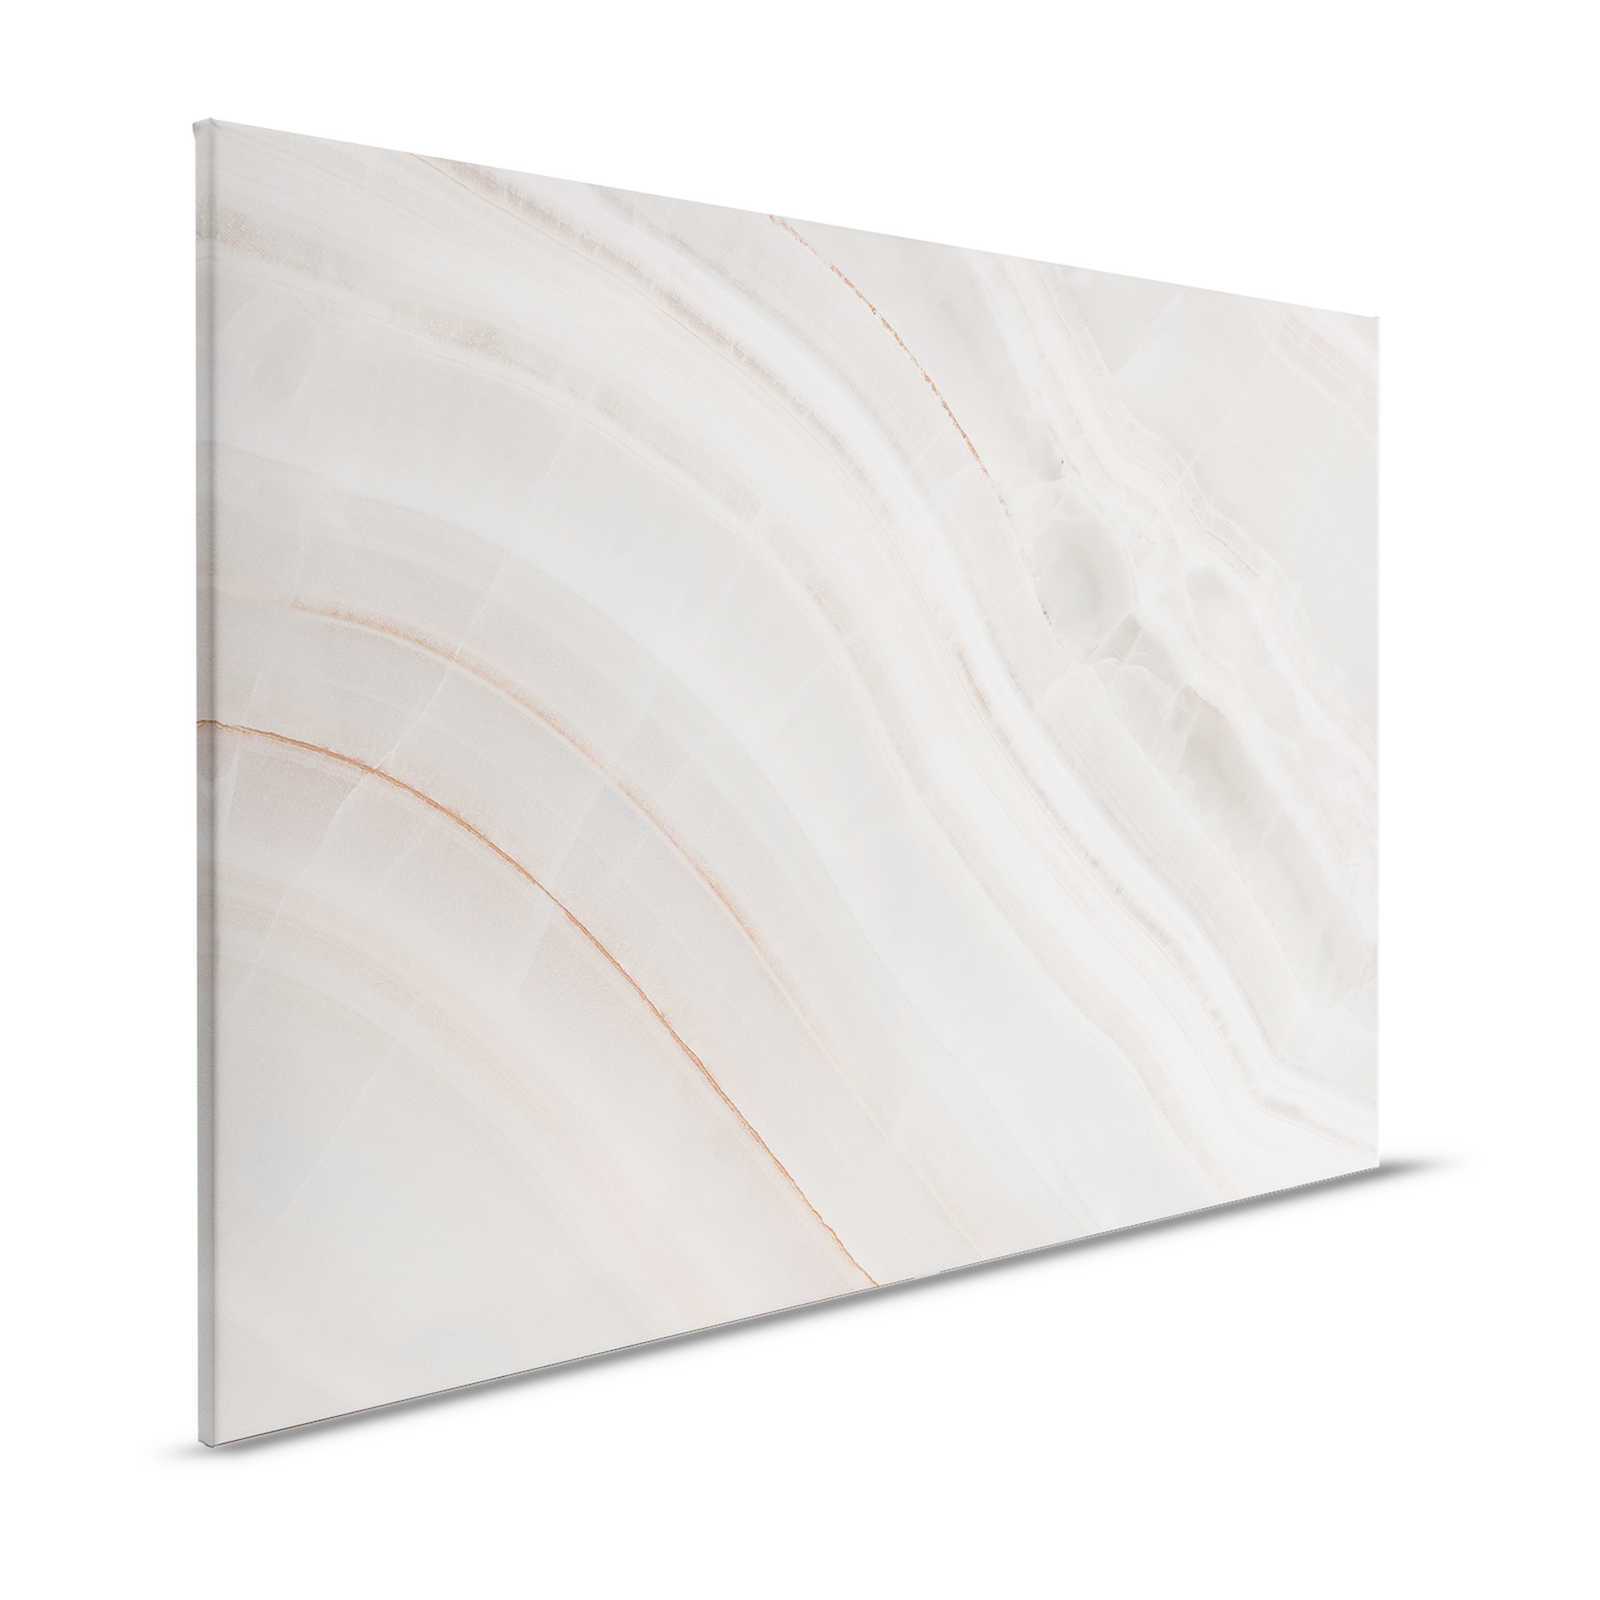 Marble Canvas Painting with Marbled Stone Panel - 1.20 m x 0.80 m
